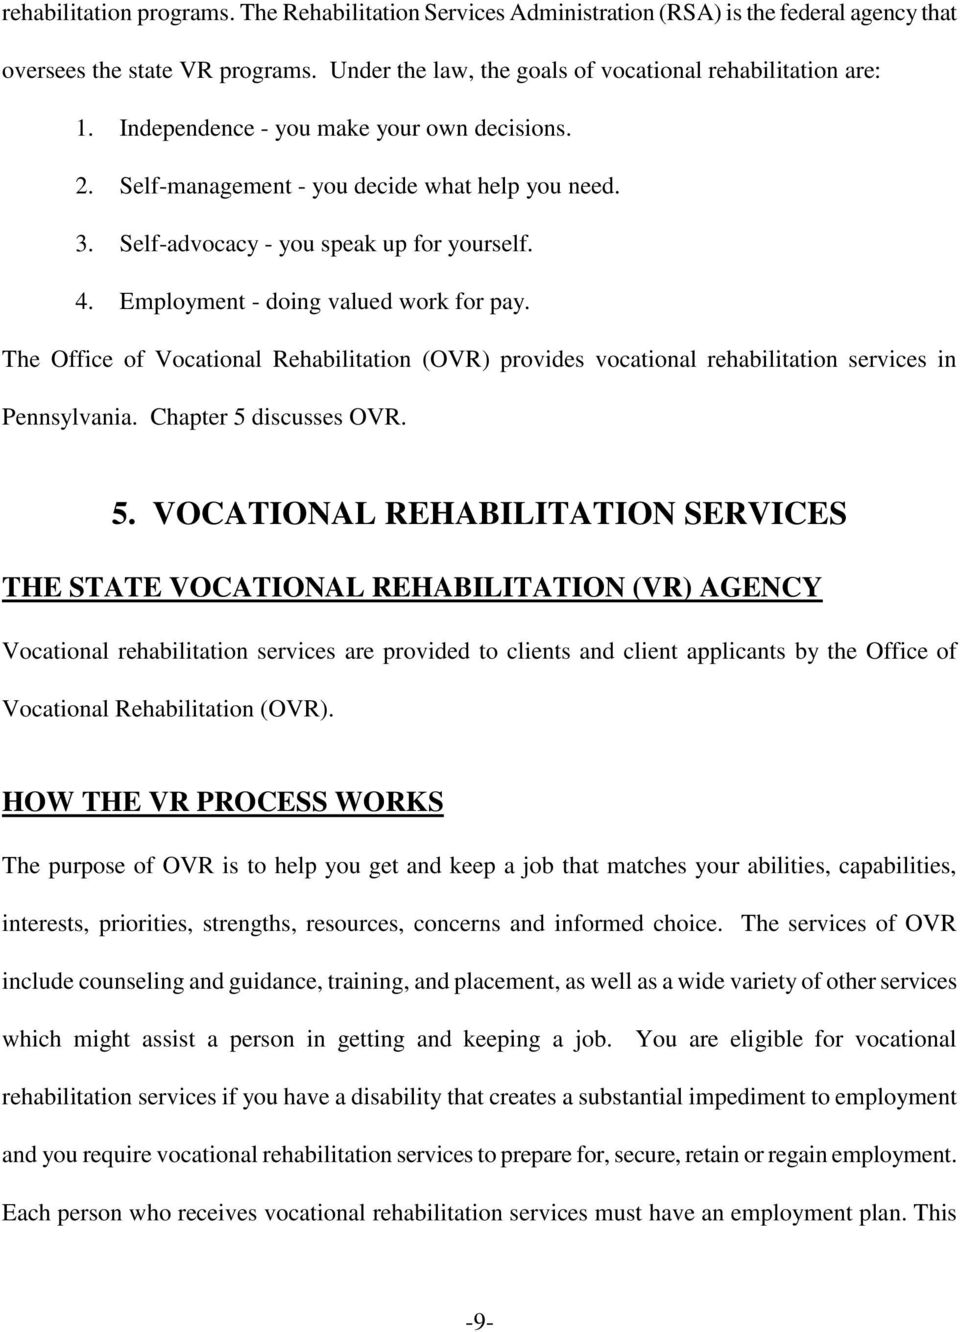 The Office of Vocational Rehabilitation (OVR) provides vocational rehabilitation services in Pennsylvania. Chapter 5 